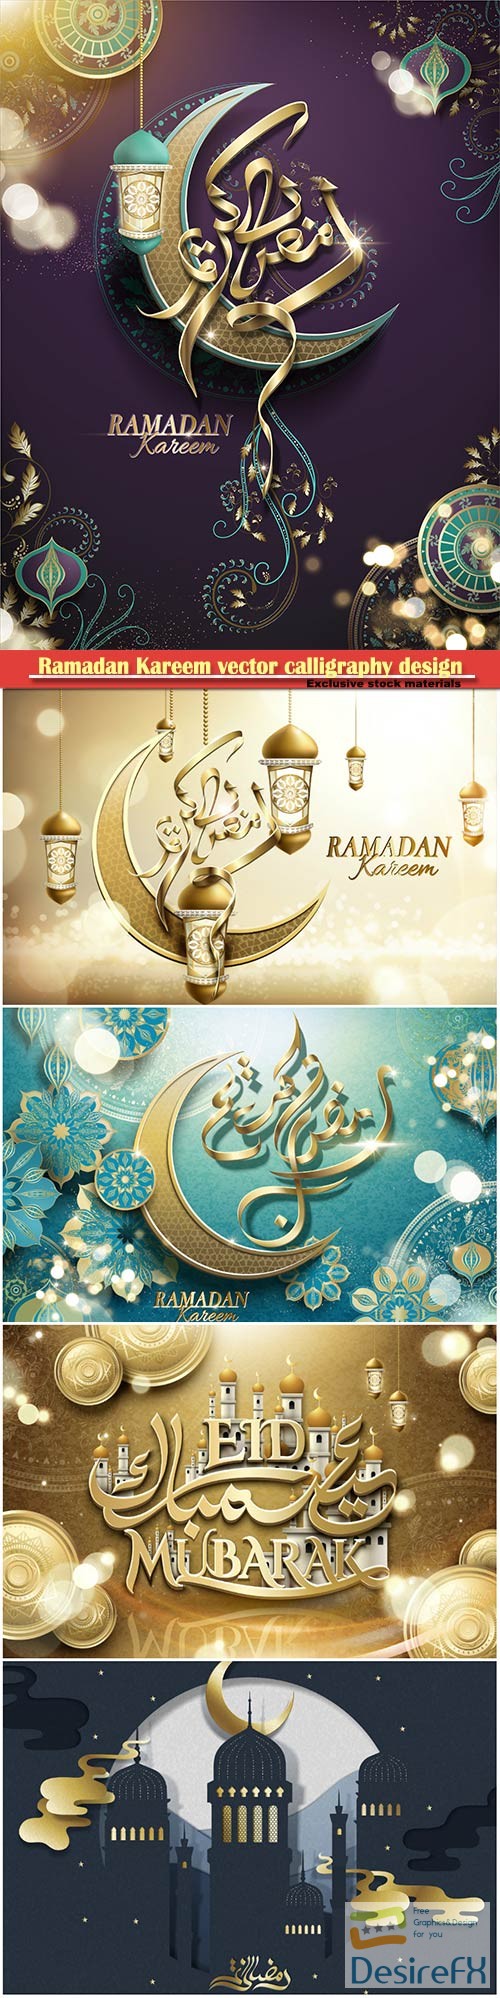 Ramadan Kareem vector calligraphy design with decorative floral pattern,mosque silhouette, crescent and glittering islamic background # 4